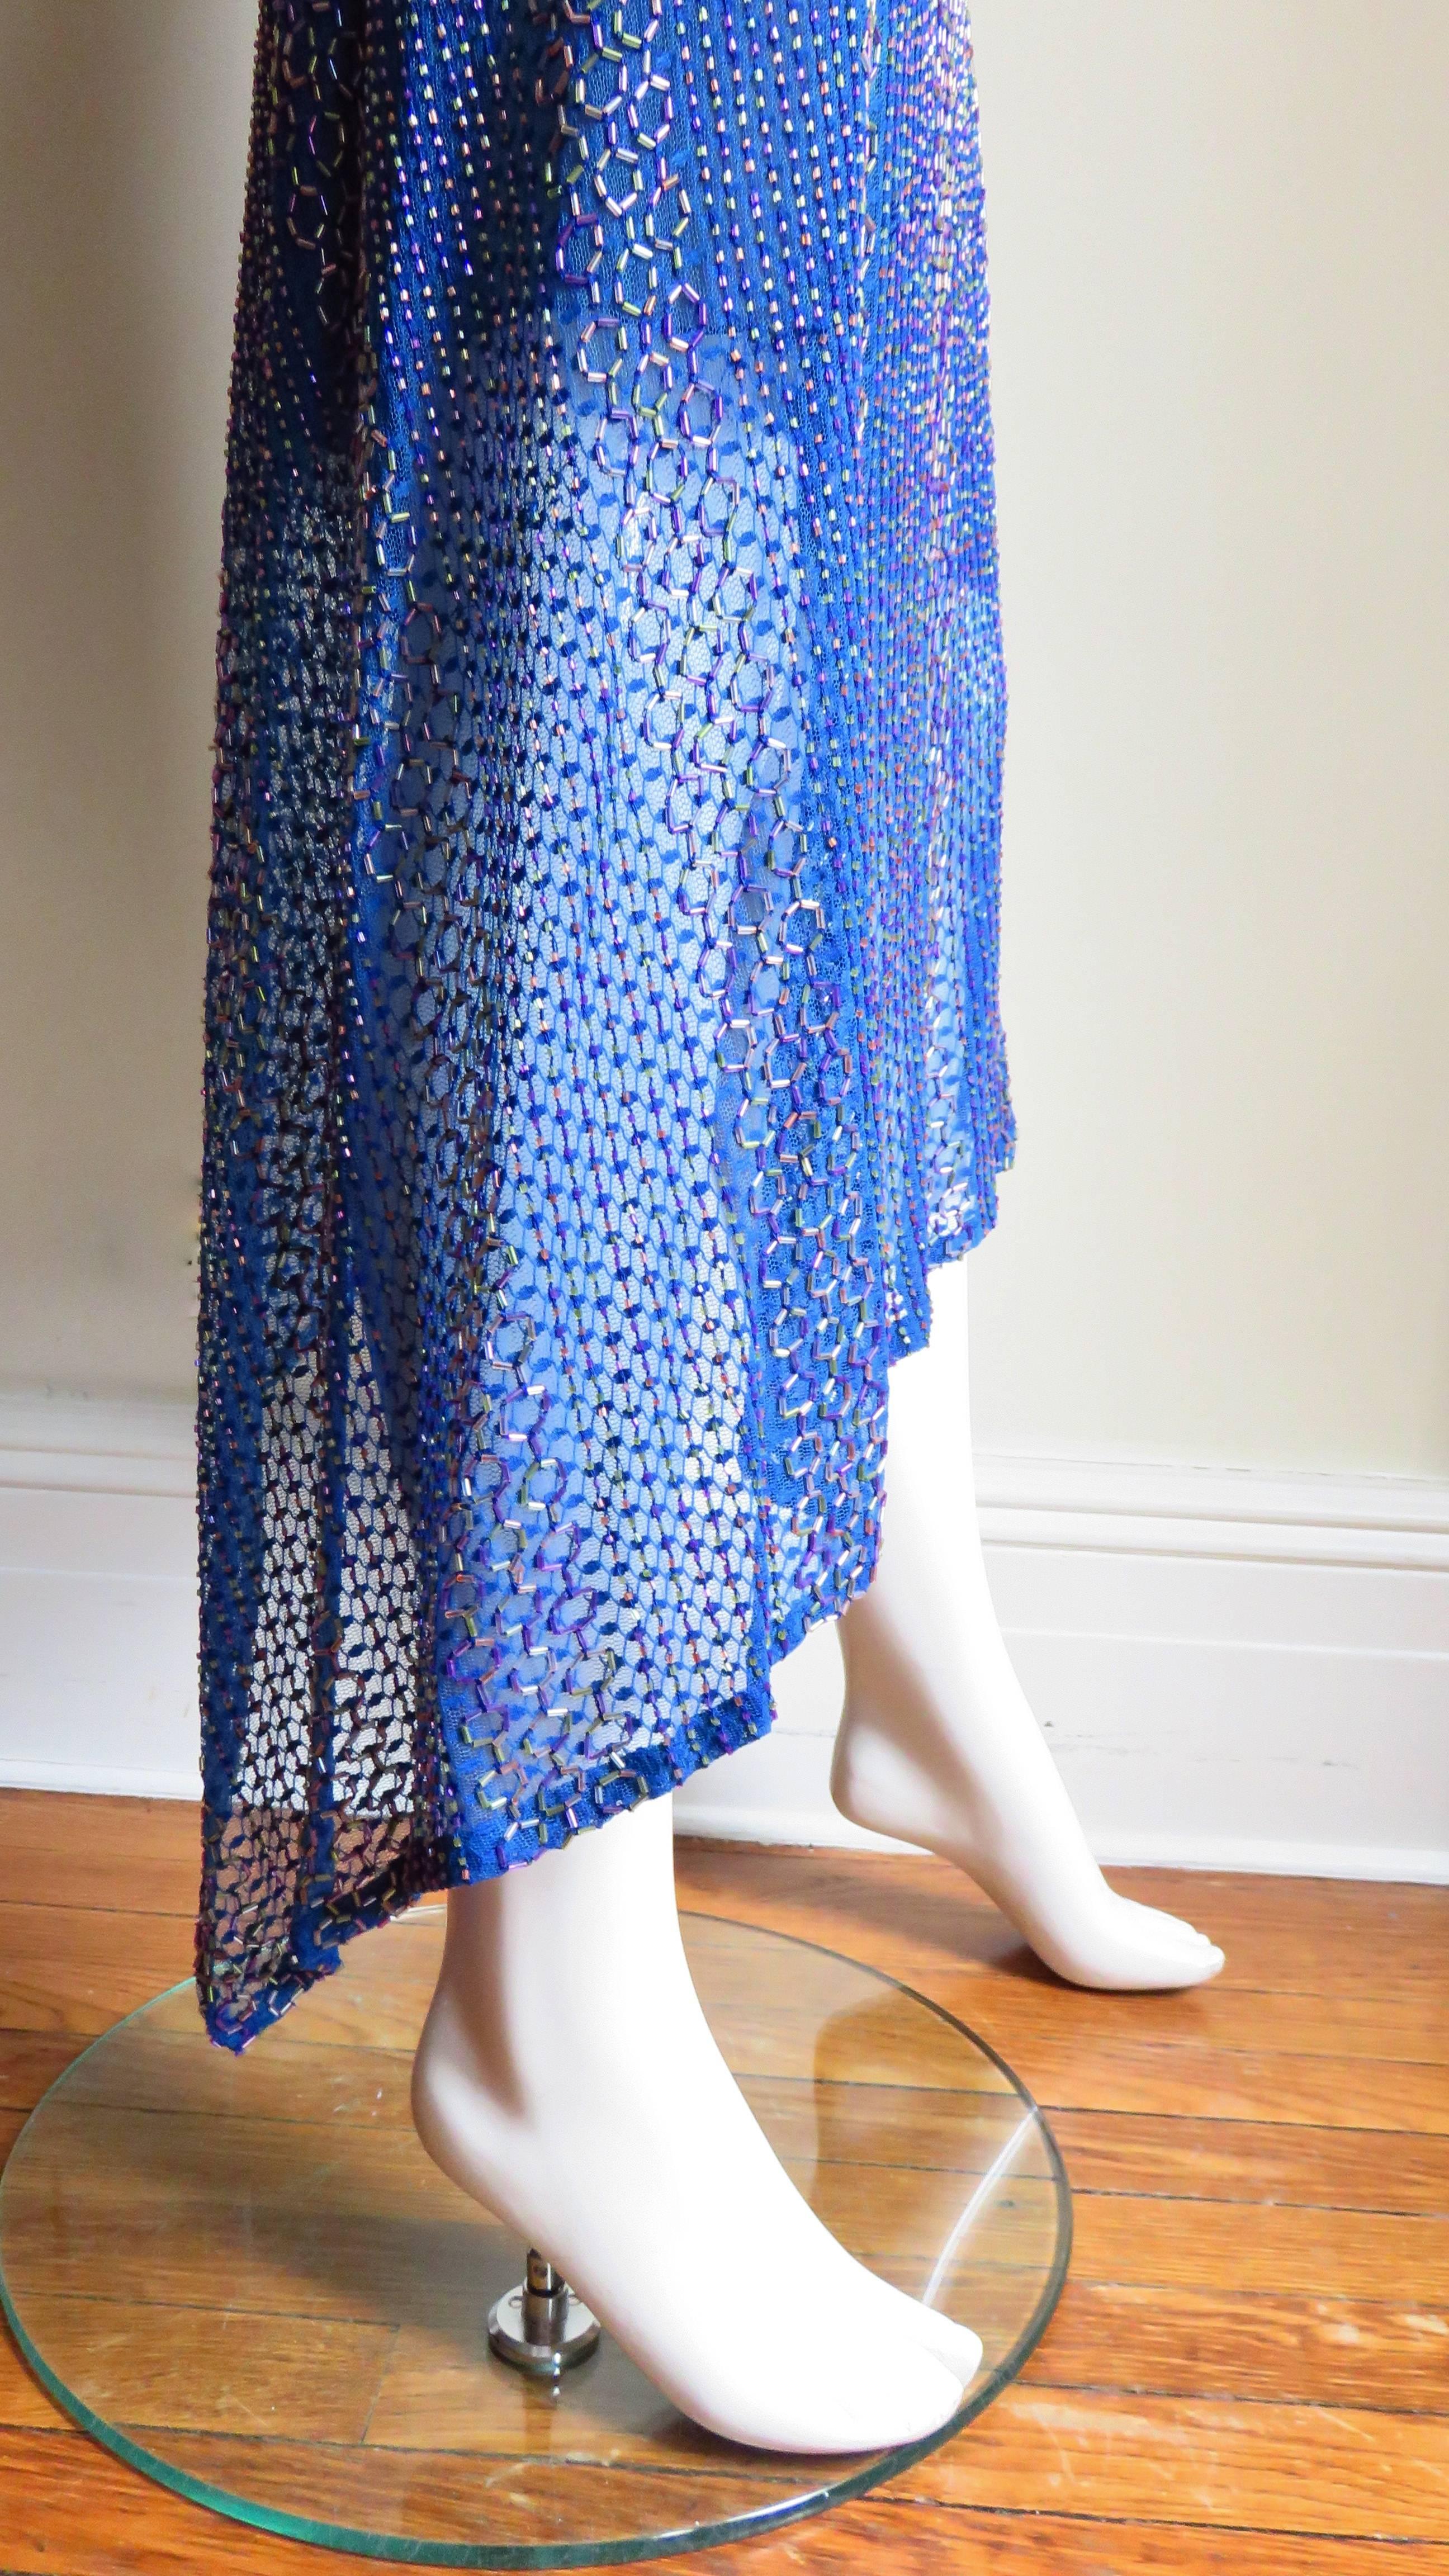 Women's Ordinary People New Skirt with Beading For Sale